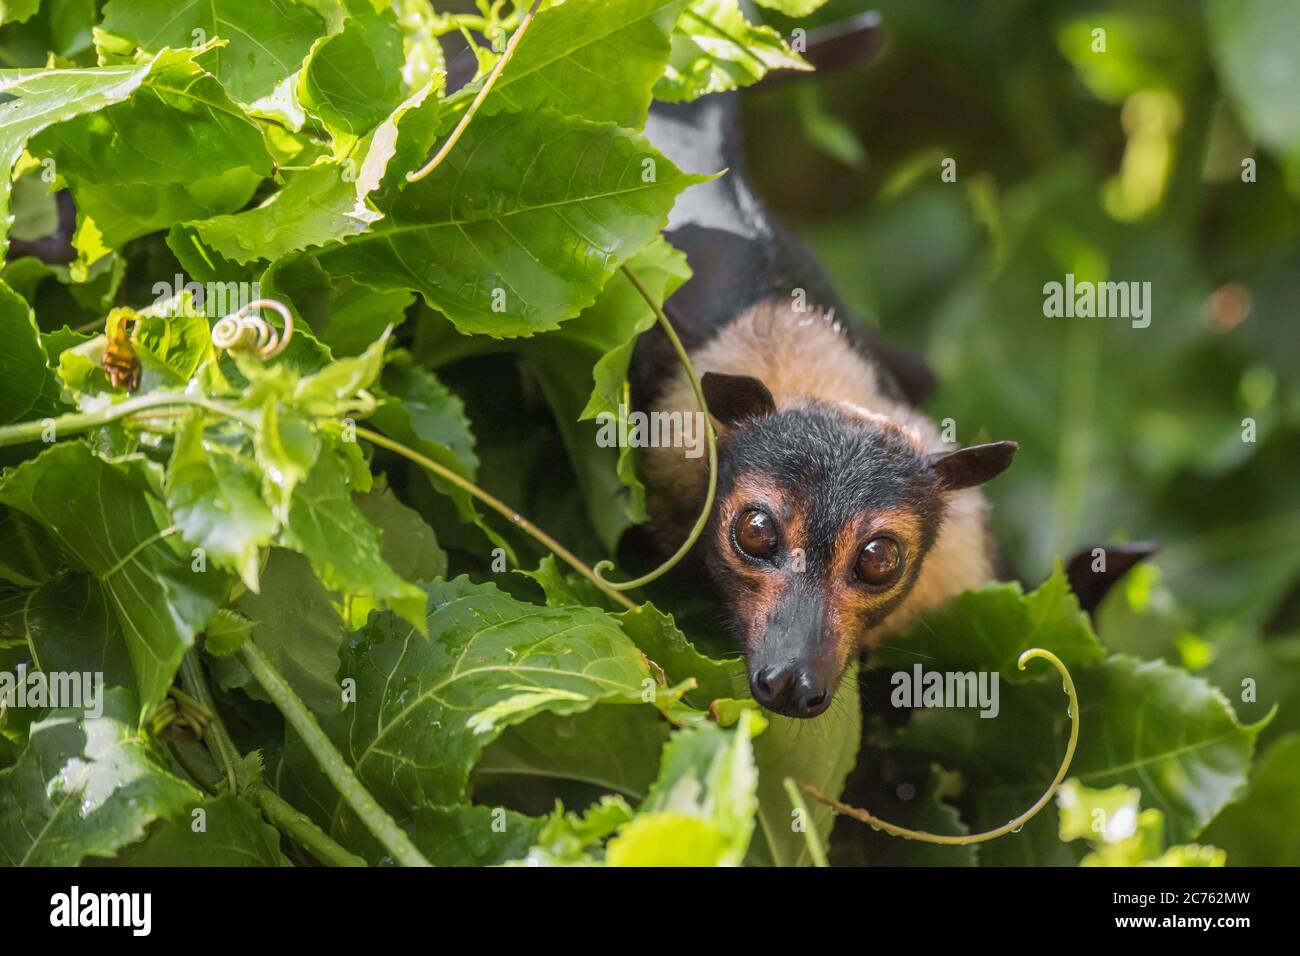 A wild and endangered Spectacled Flying Fox among some passionfruit vines at a wildlife hospital in Kuranda, Queensland. Stock Photo